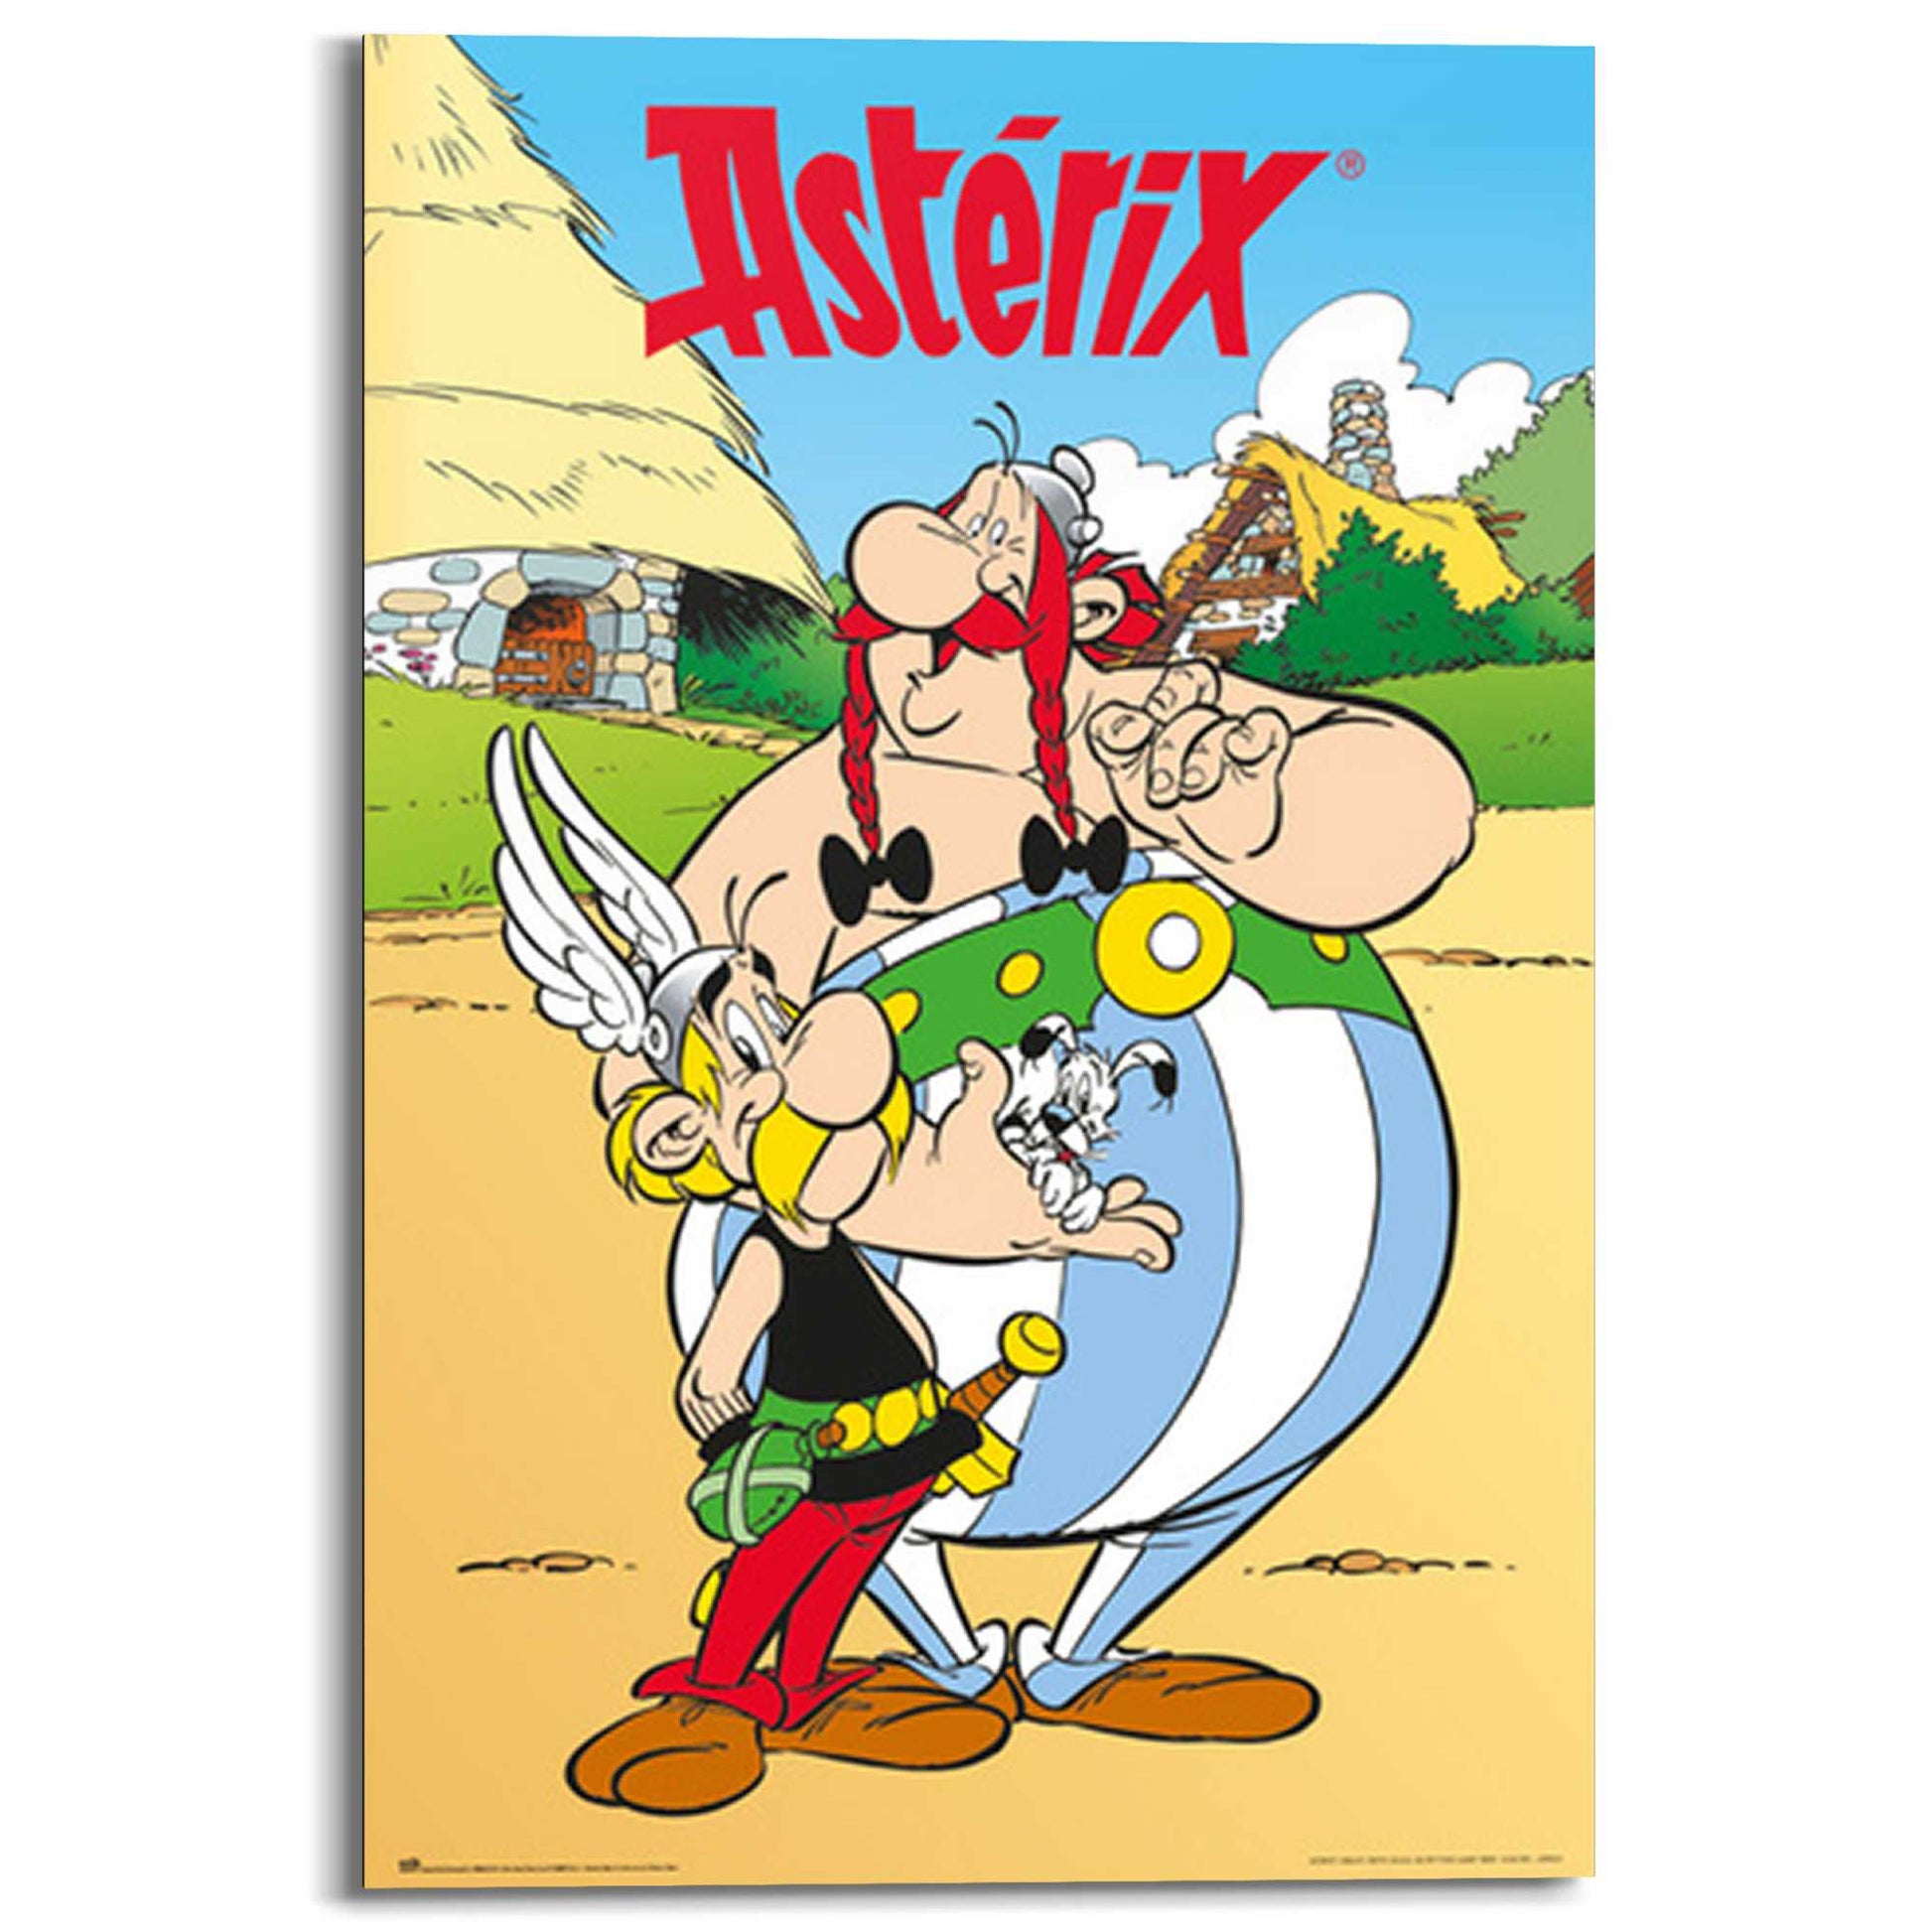 Painting Asterix and Obelix 90x60